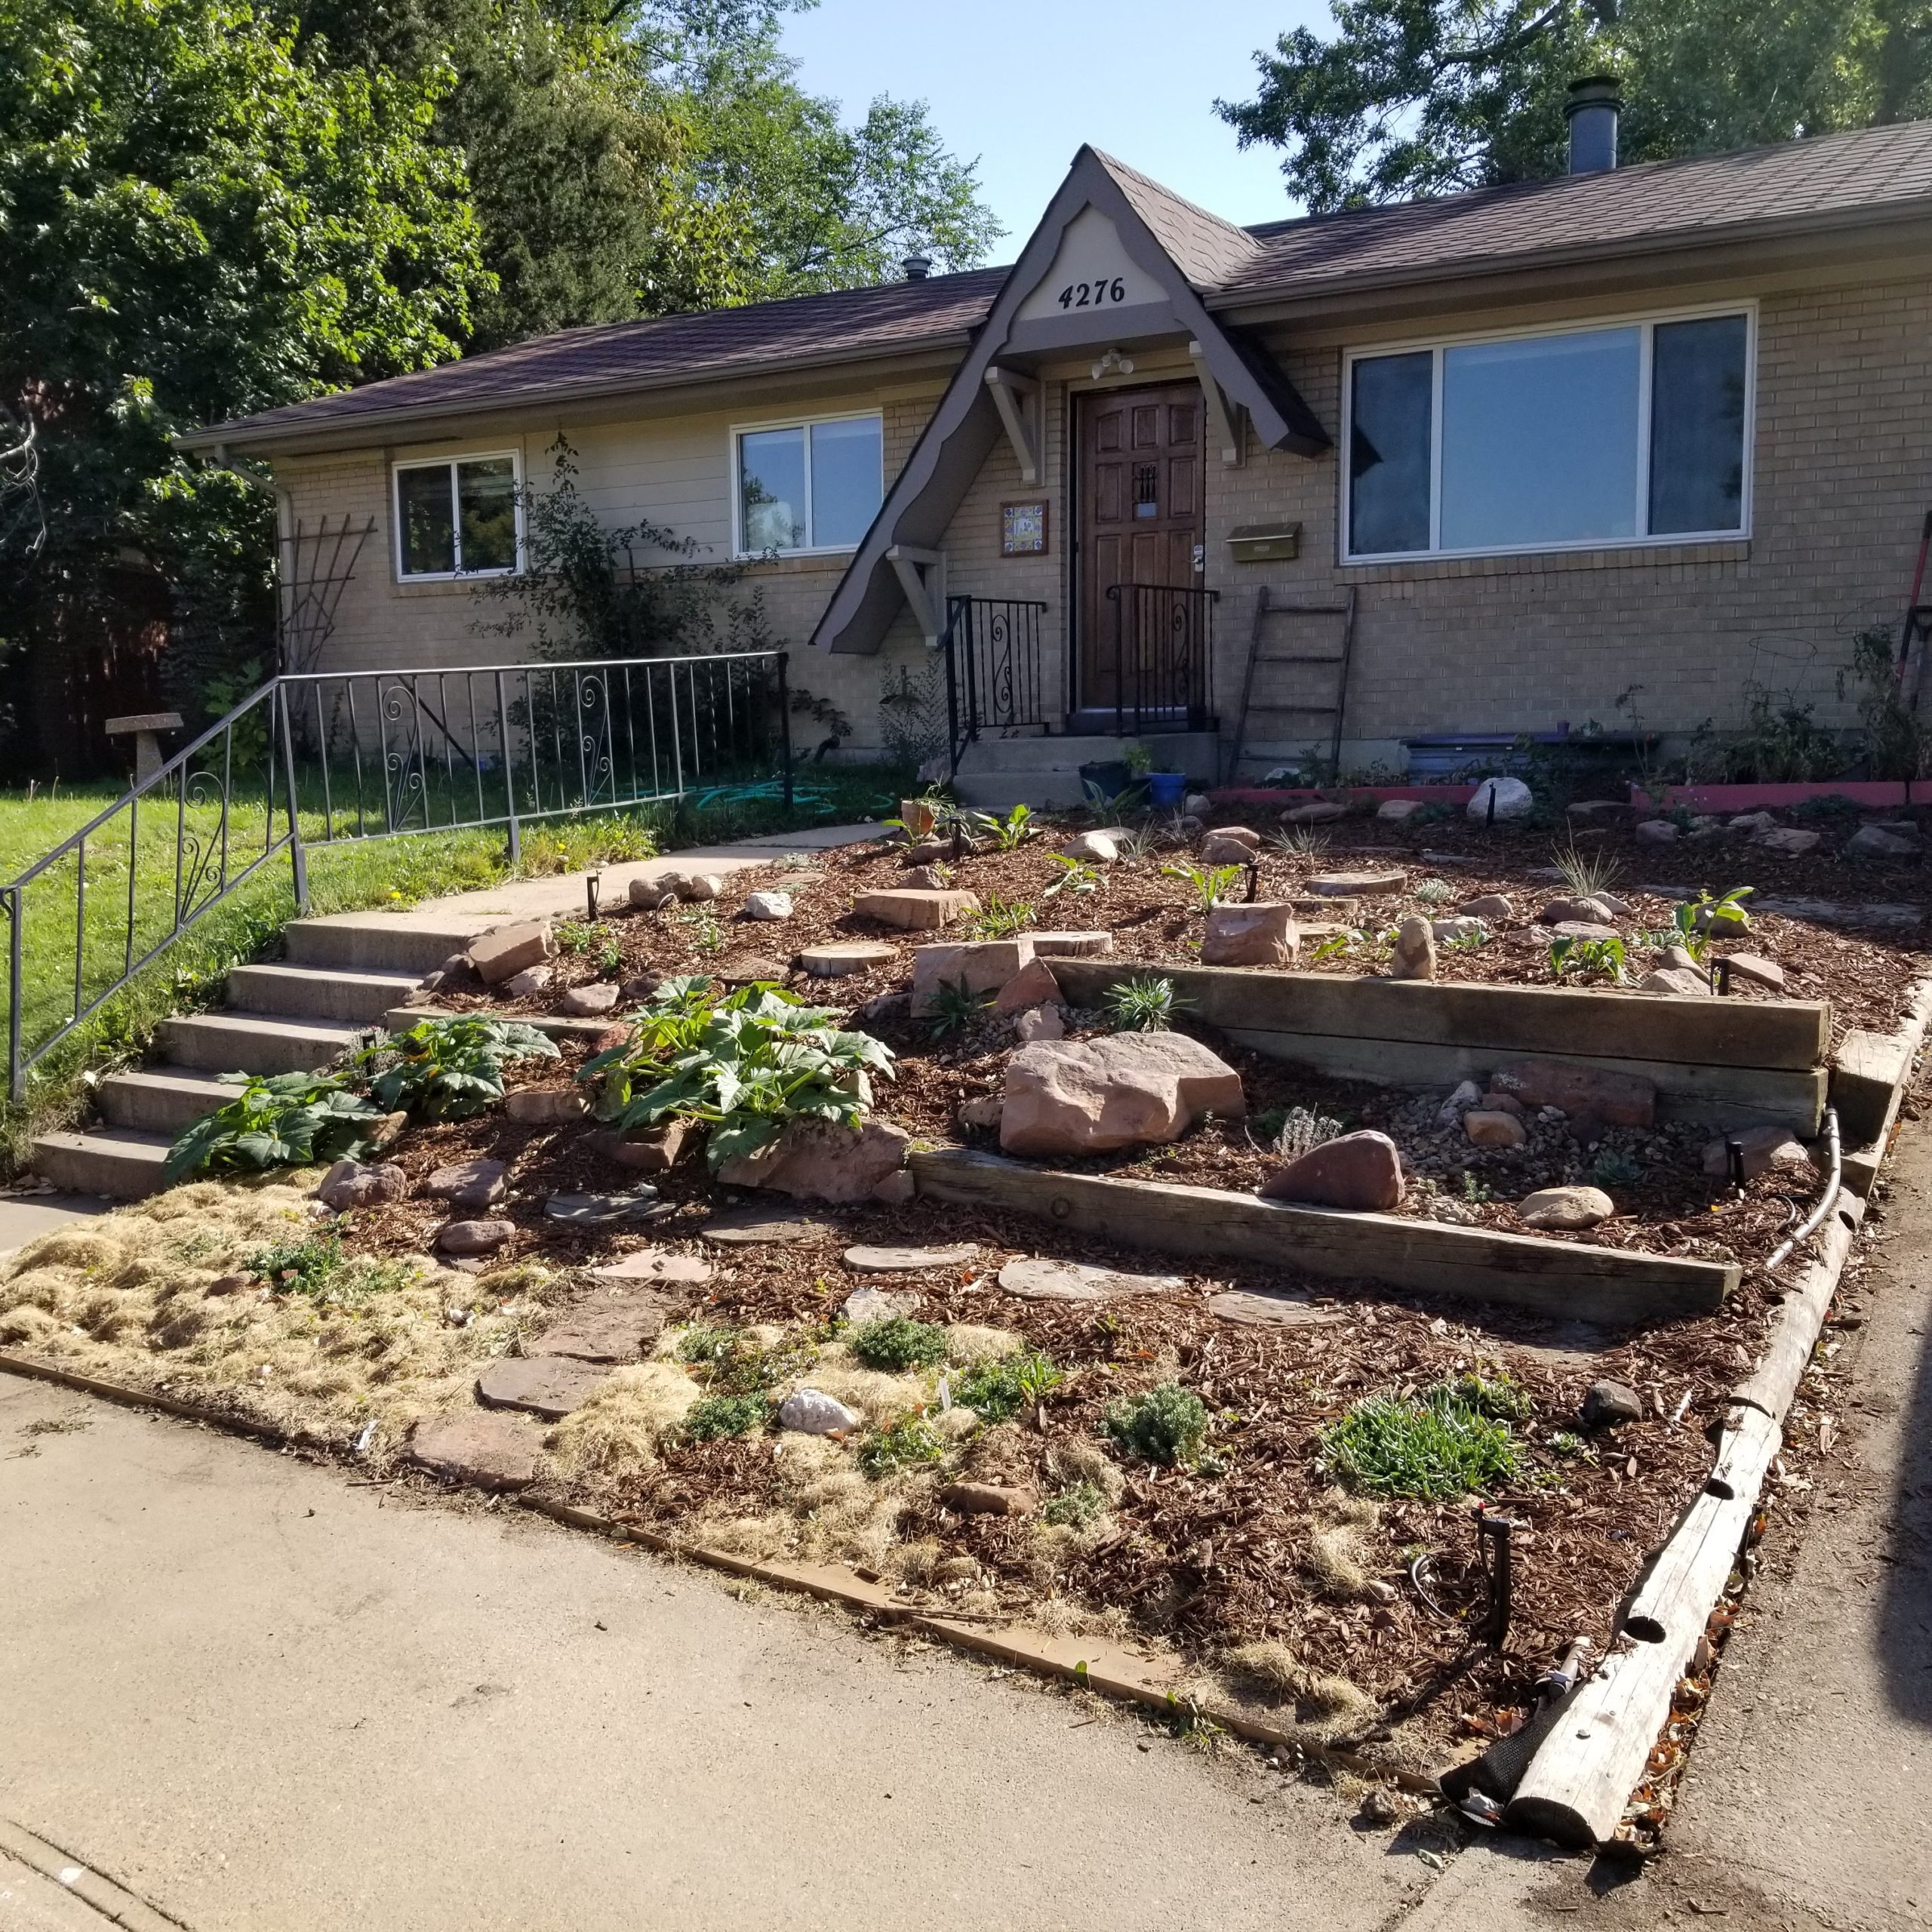 Tiered garden in front yard with mulch, flowers, and rocks